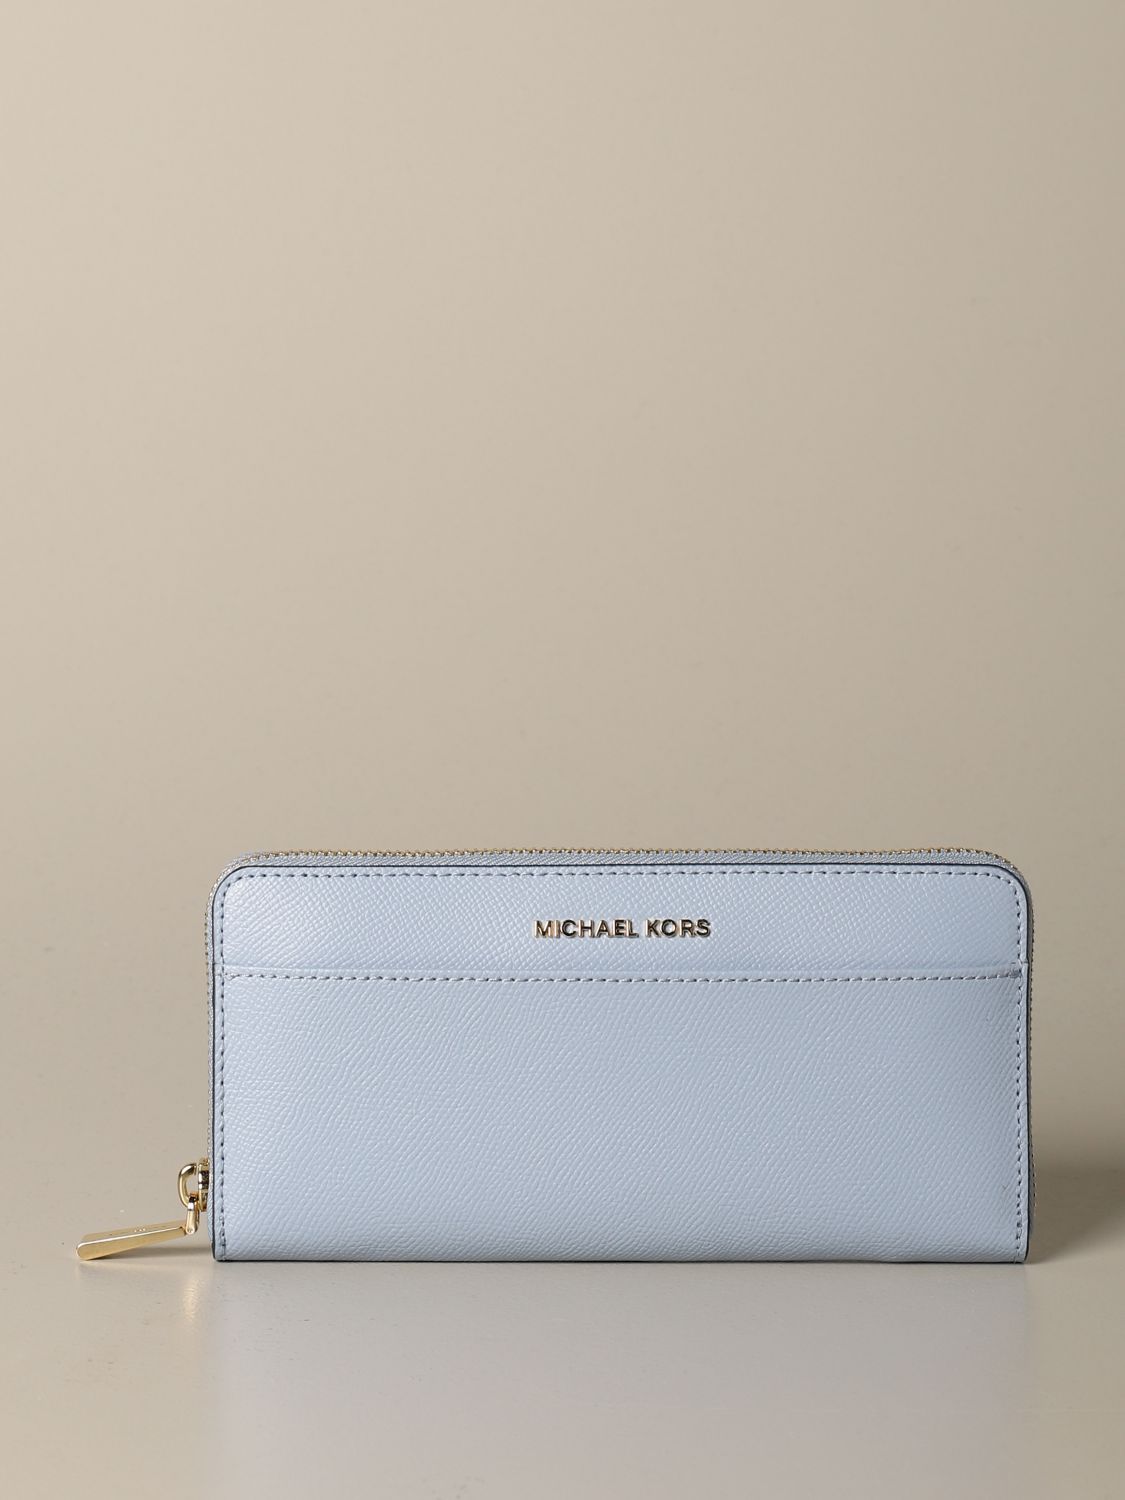 Michael Kors wallets outlet: discounted prices